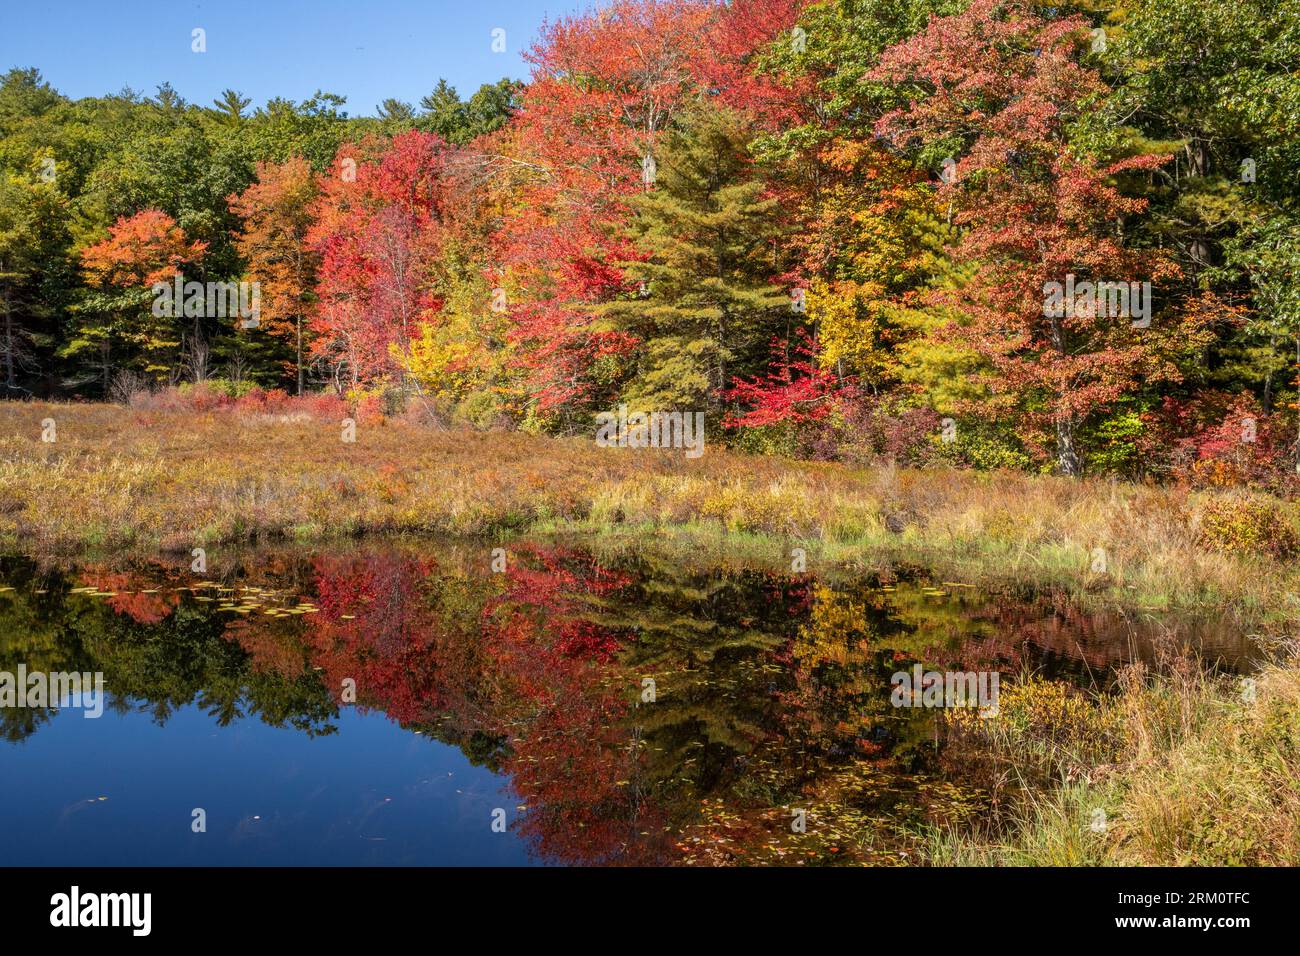 Autumn landscape in a small rural New England town Stock Photo